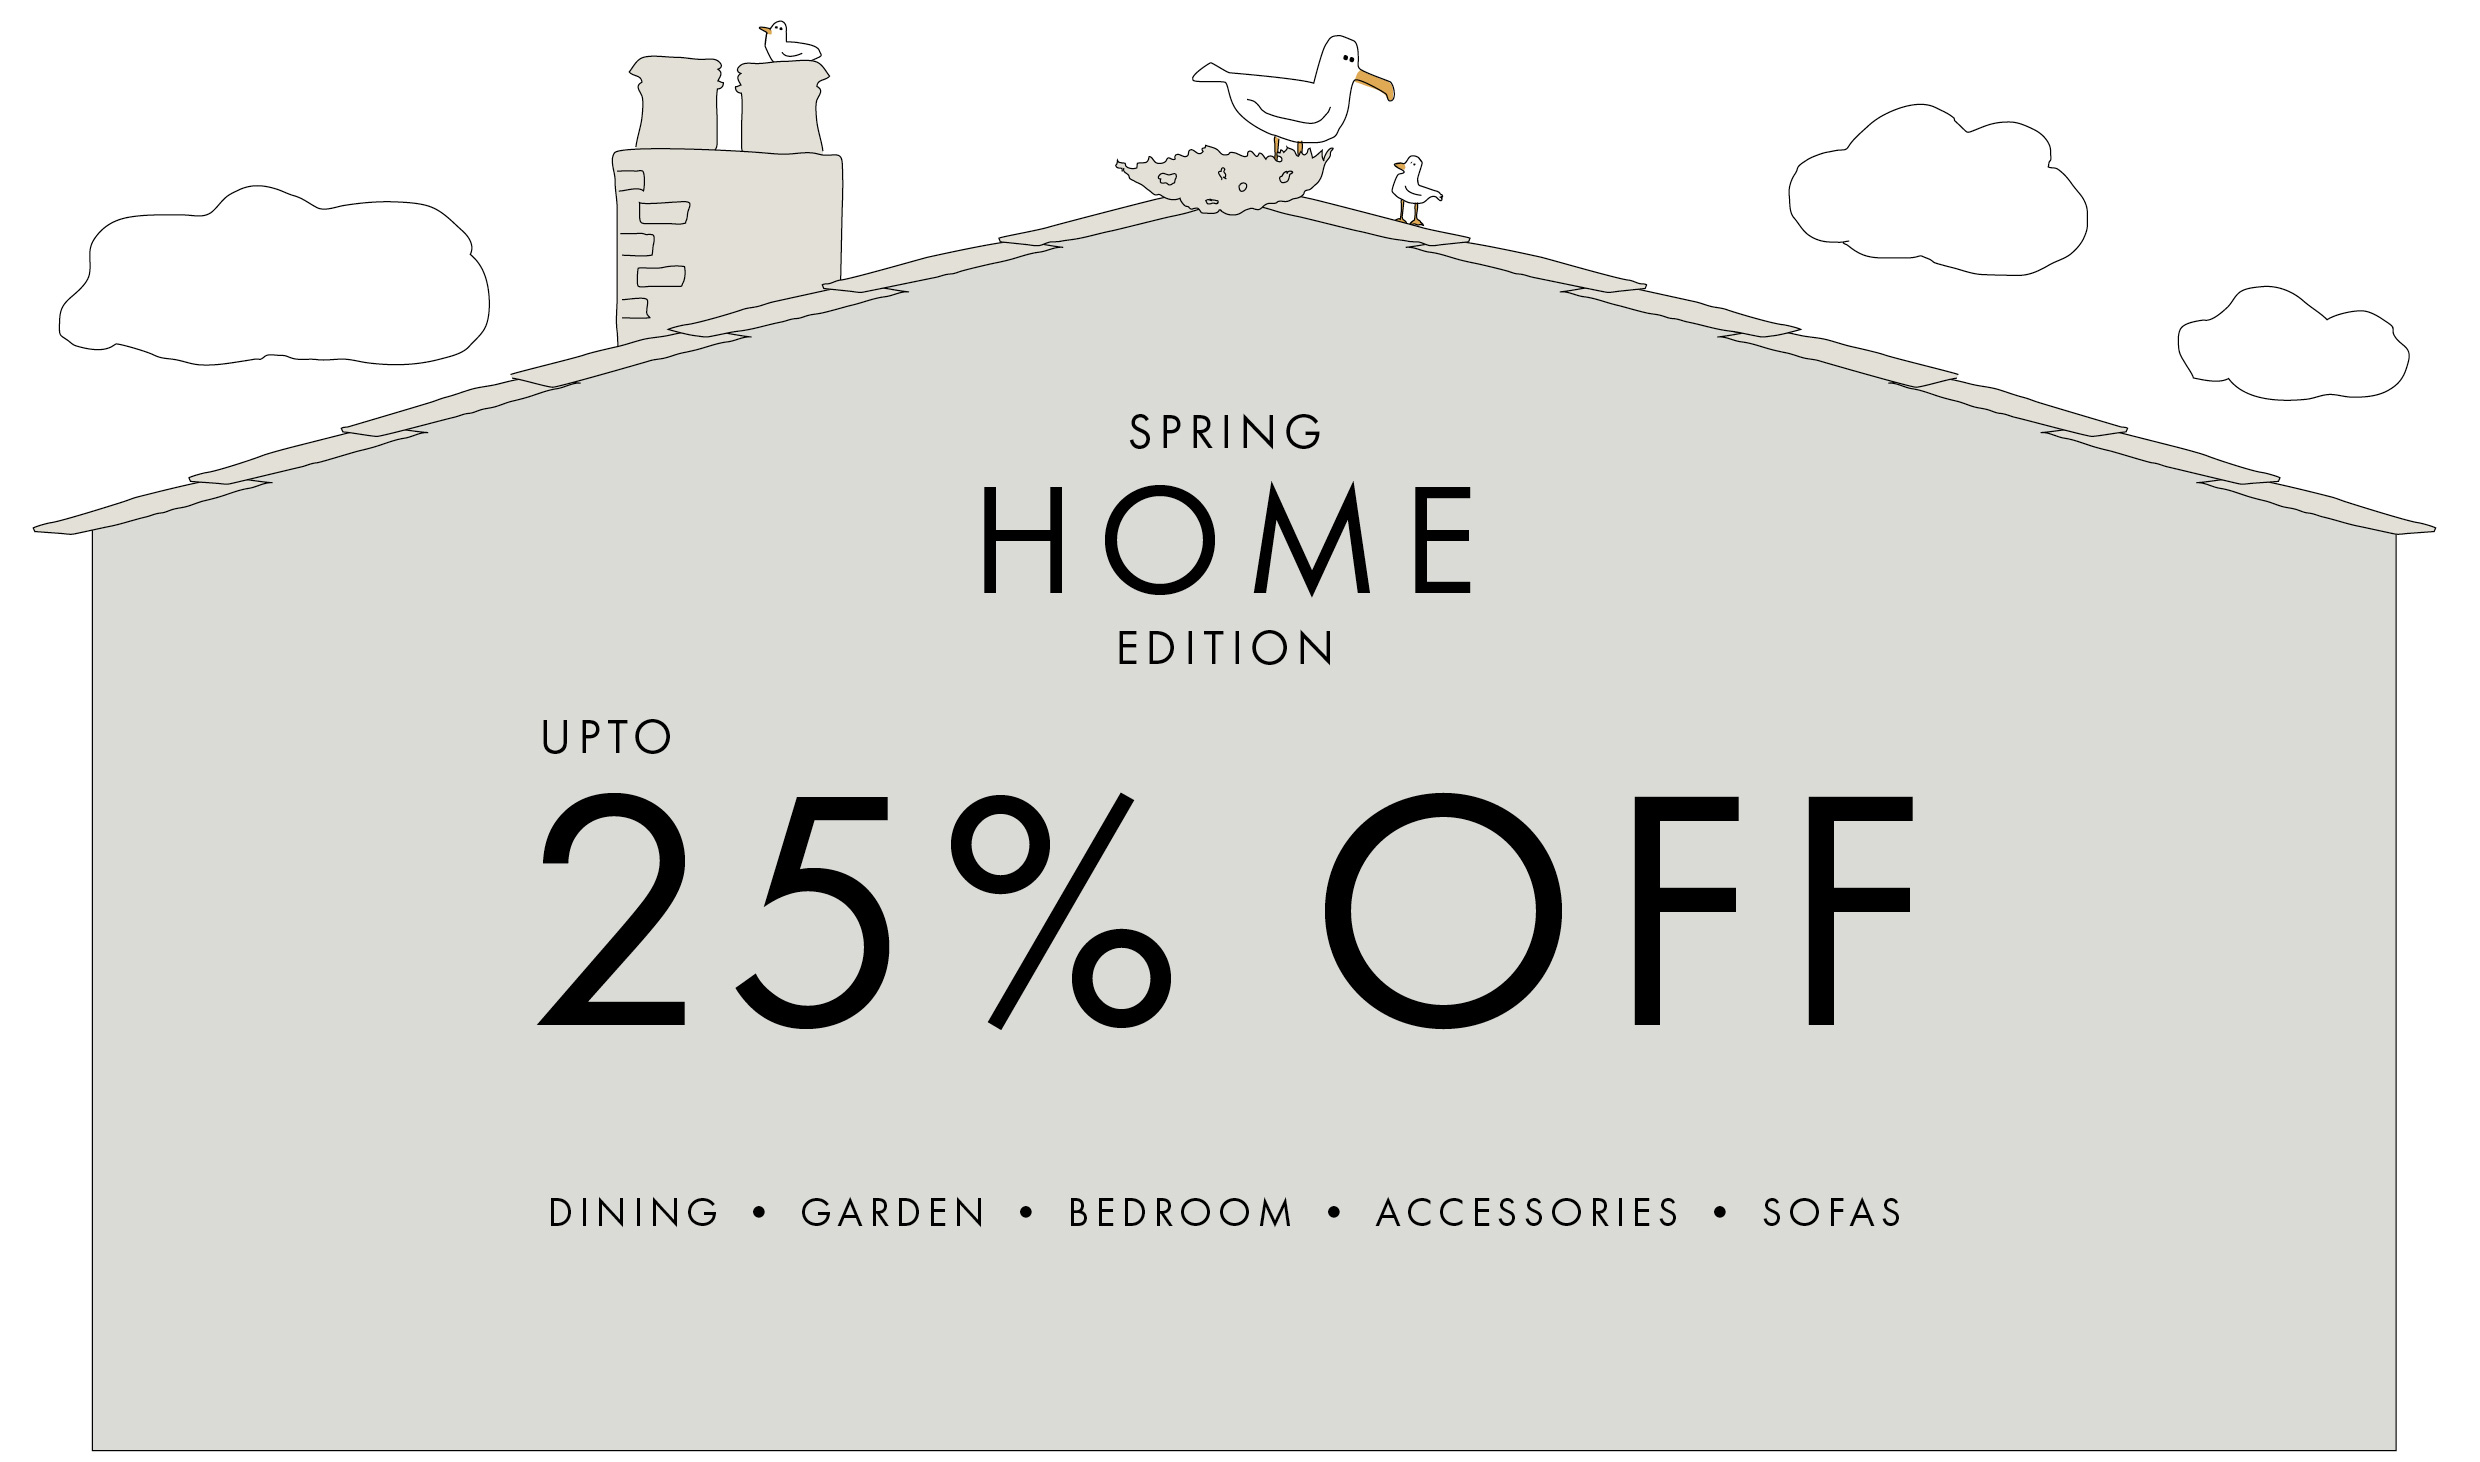 Upto 25% Off Furniture & Home accessories In Spring Home Edition